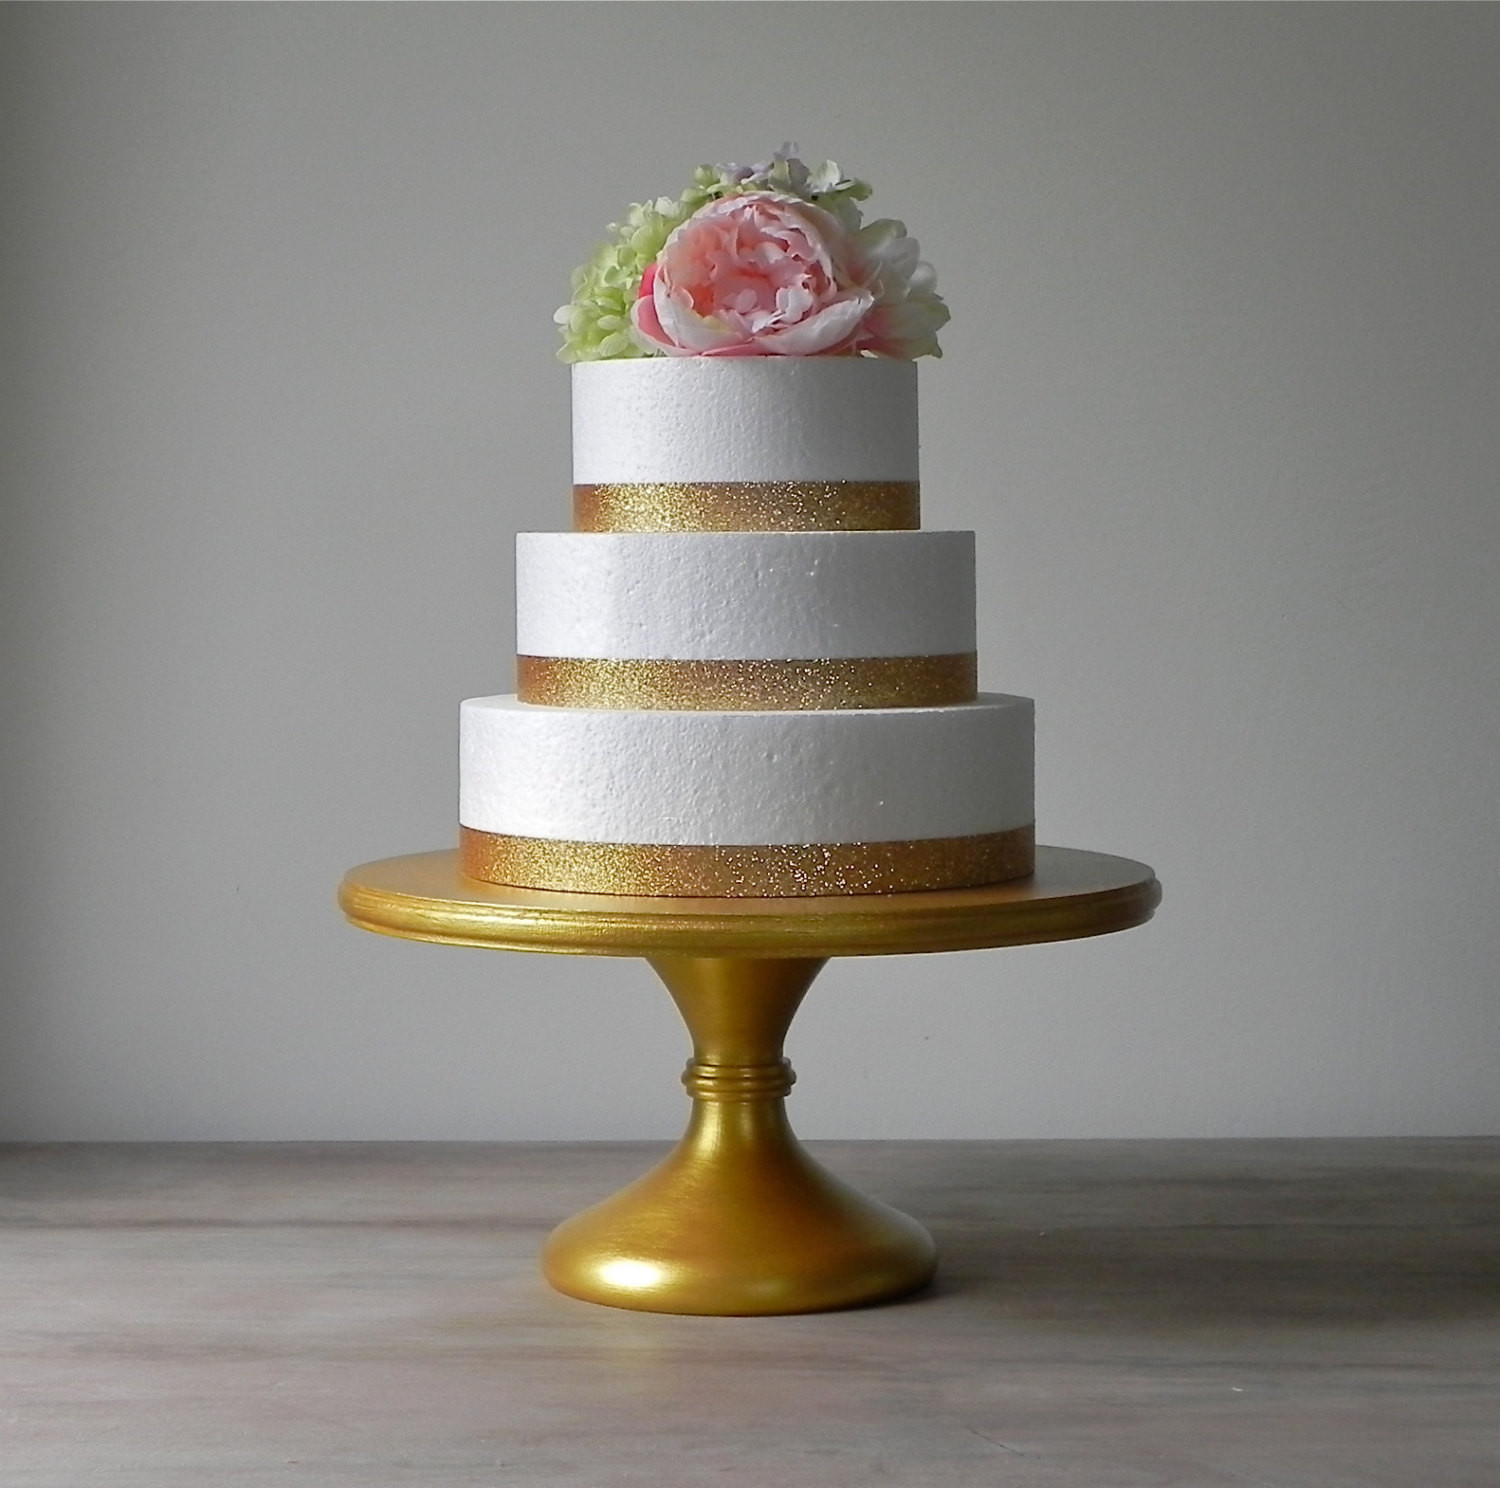 Acrylic Cake Stands For Wedding Cakes
 Acrylic Wedding Cake Stands